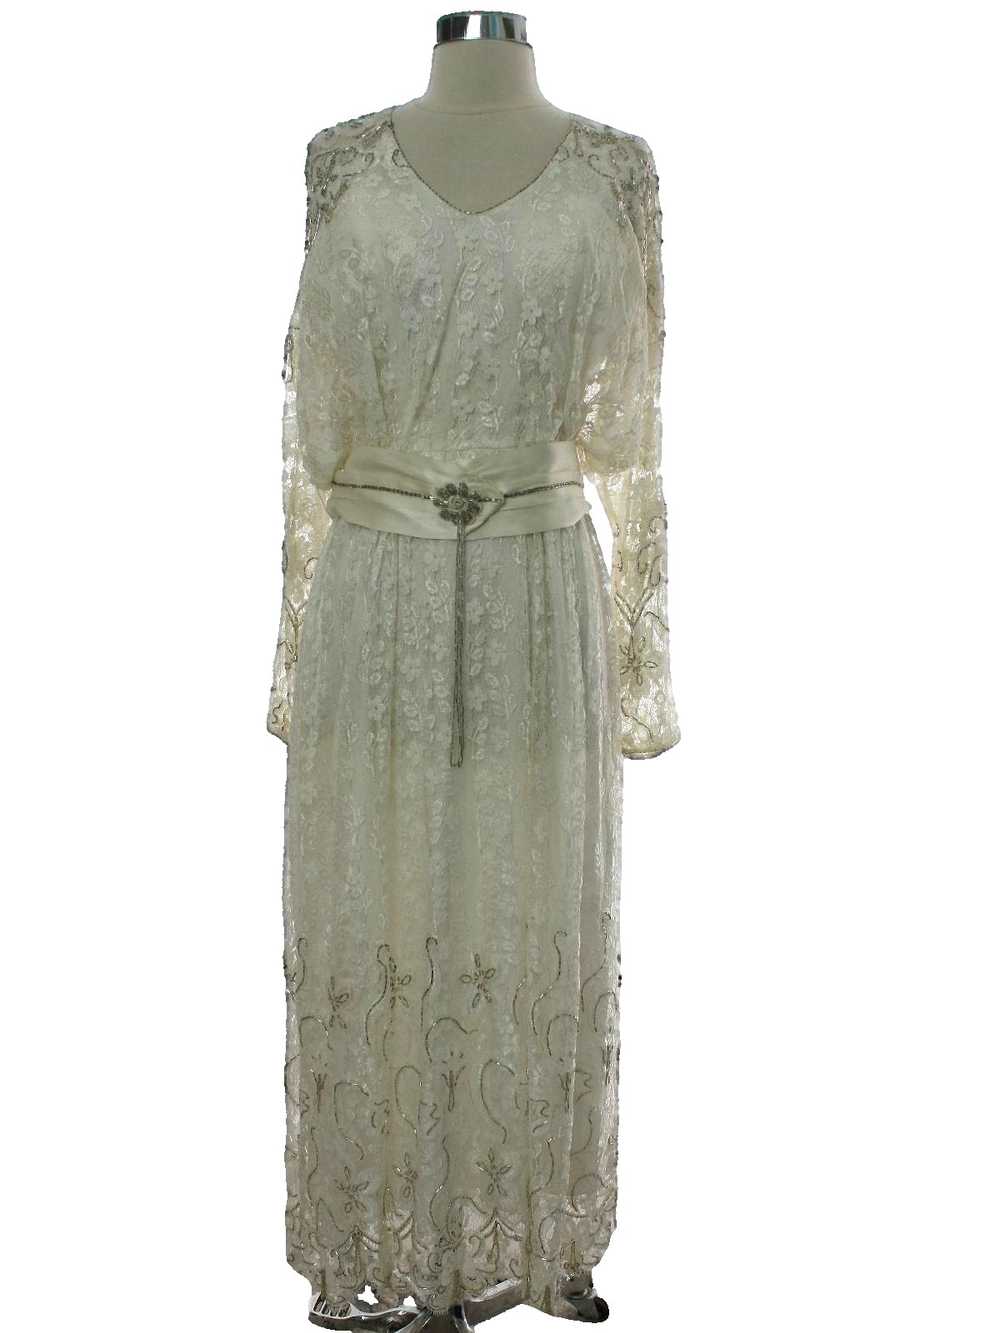 1970's Cocktail or Wedding Maxi Dress - image 1